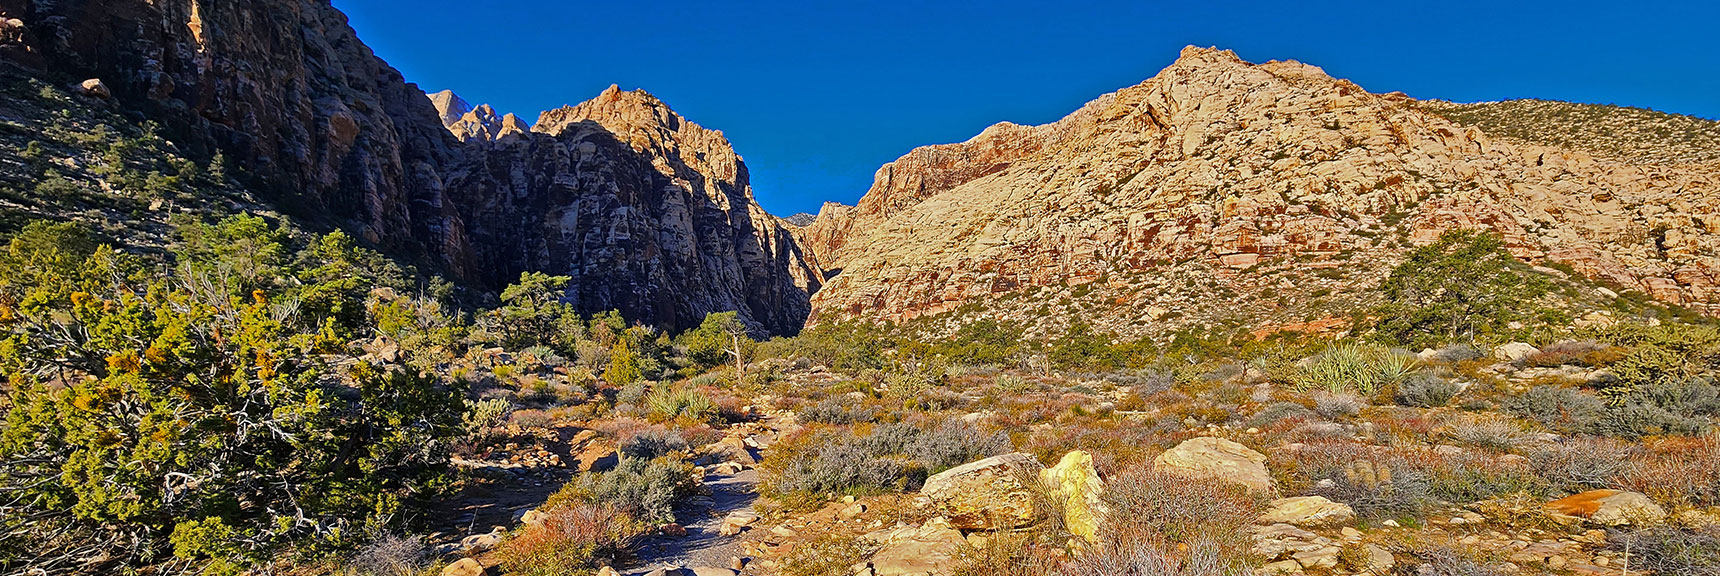 Approach Trail Becoming Rocky, Entering Forest Near Canyon Opening | Ice Box Canyon | Red Rock Canyon NCA, Nevada | Las Vegas Area Trails | David Smith